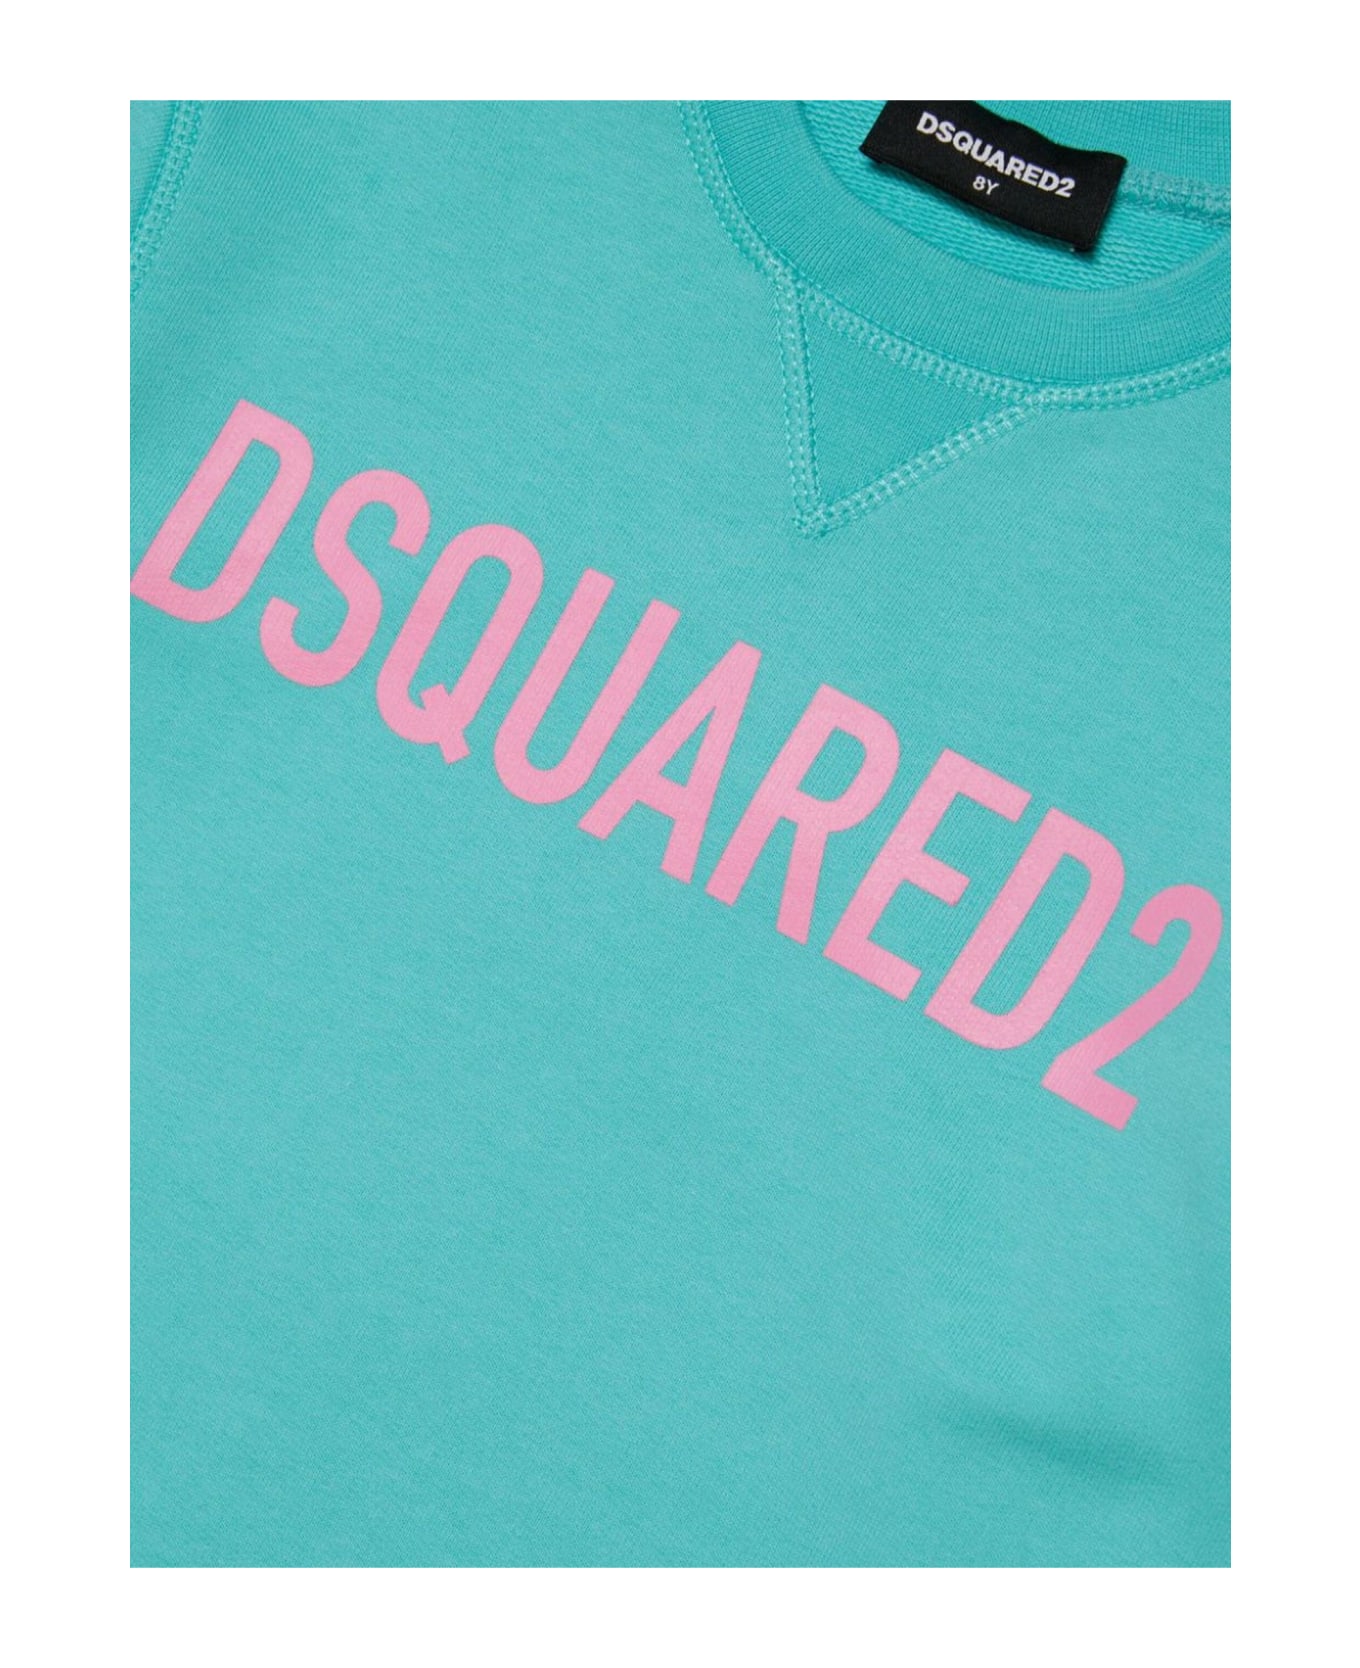 Dsquared2 Sweaters Green - Green